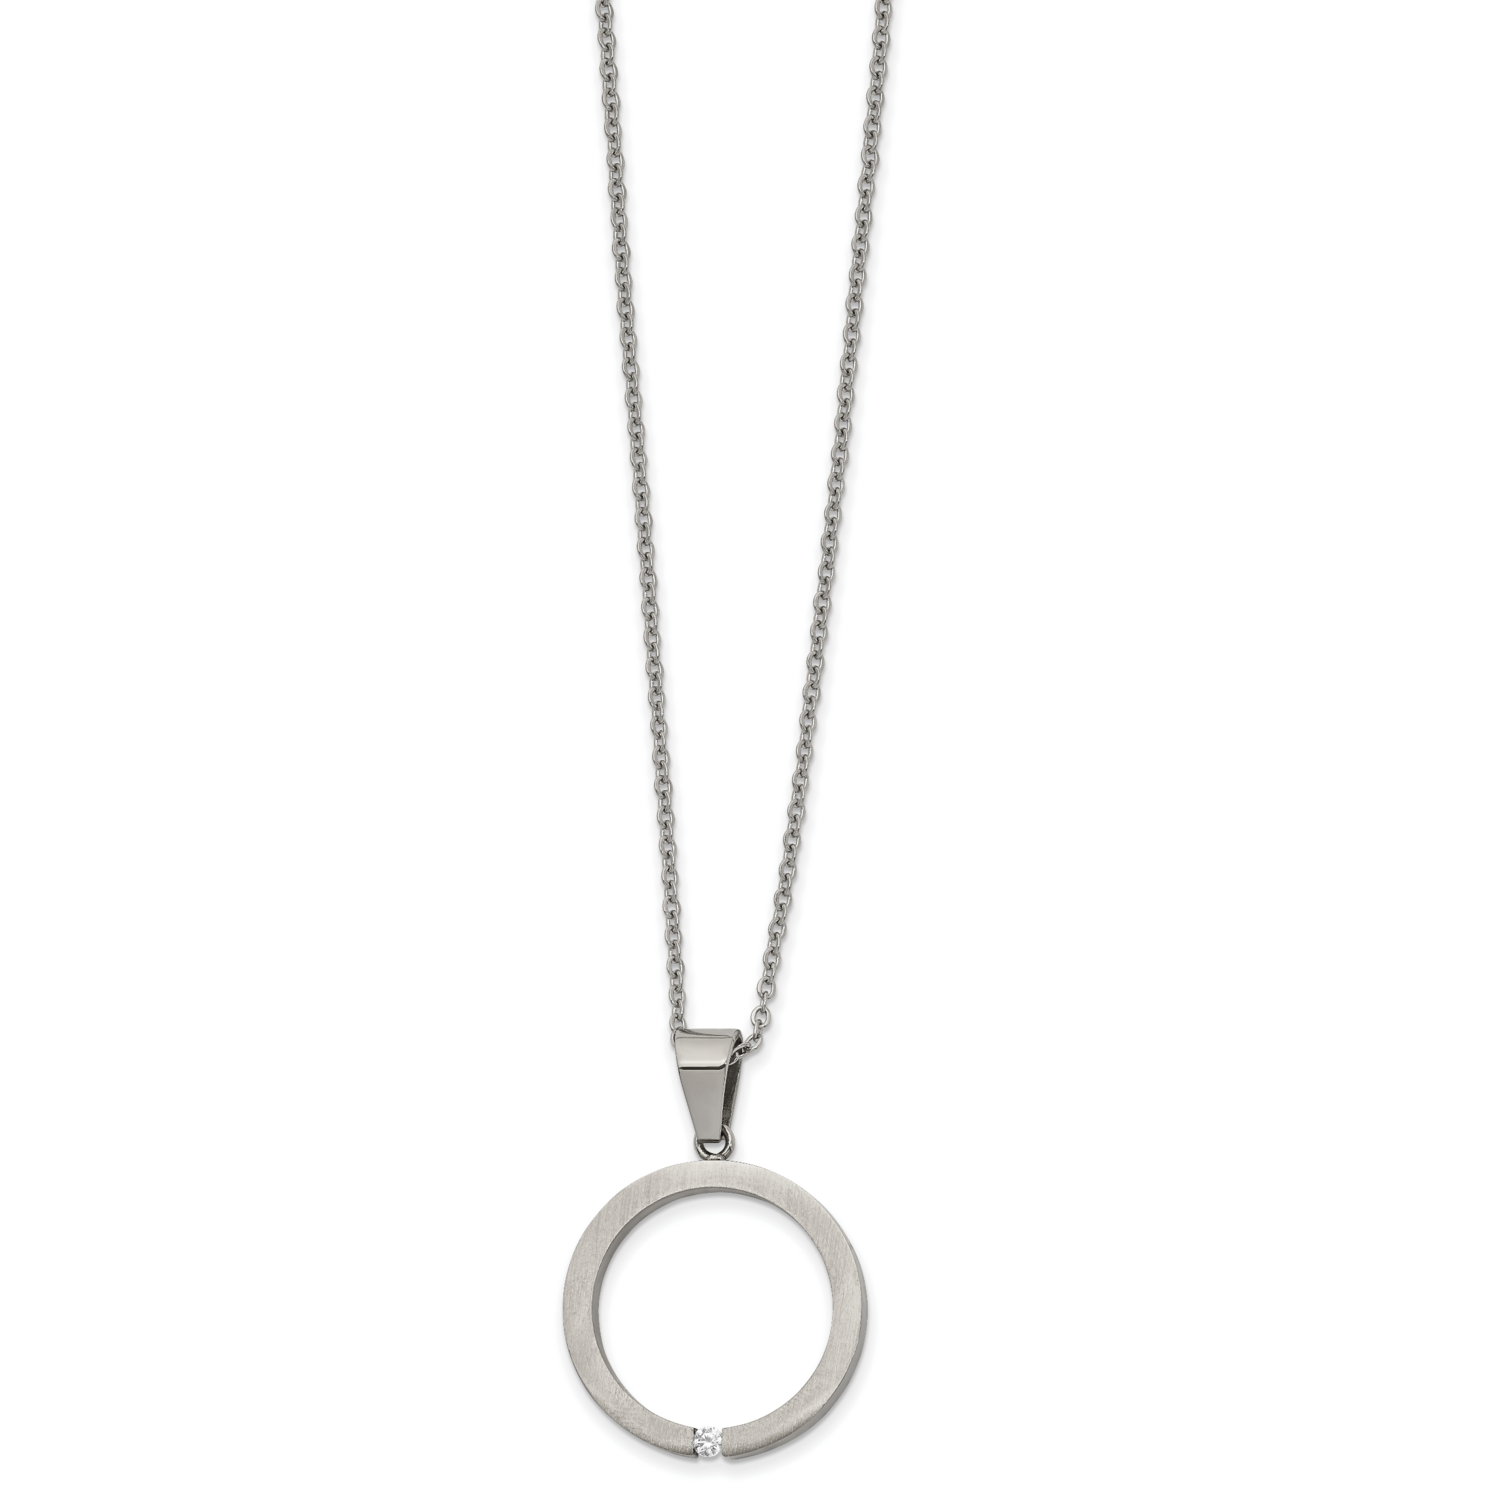 Polished CZ Stone Stone Circle 16 Inch 2 Inch Extension Necklace Stainless Steel Brushed SRN2588-16